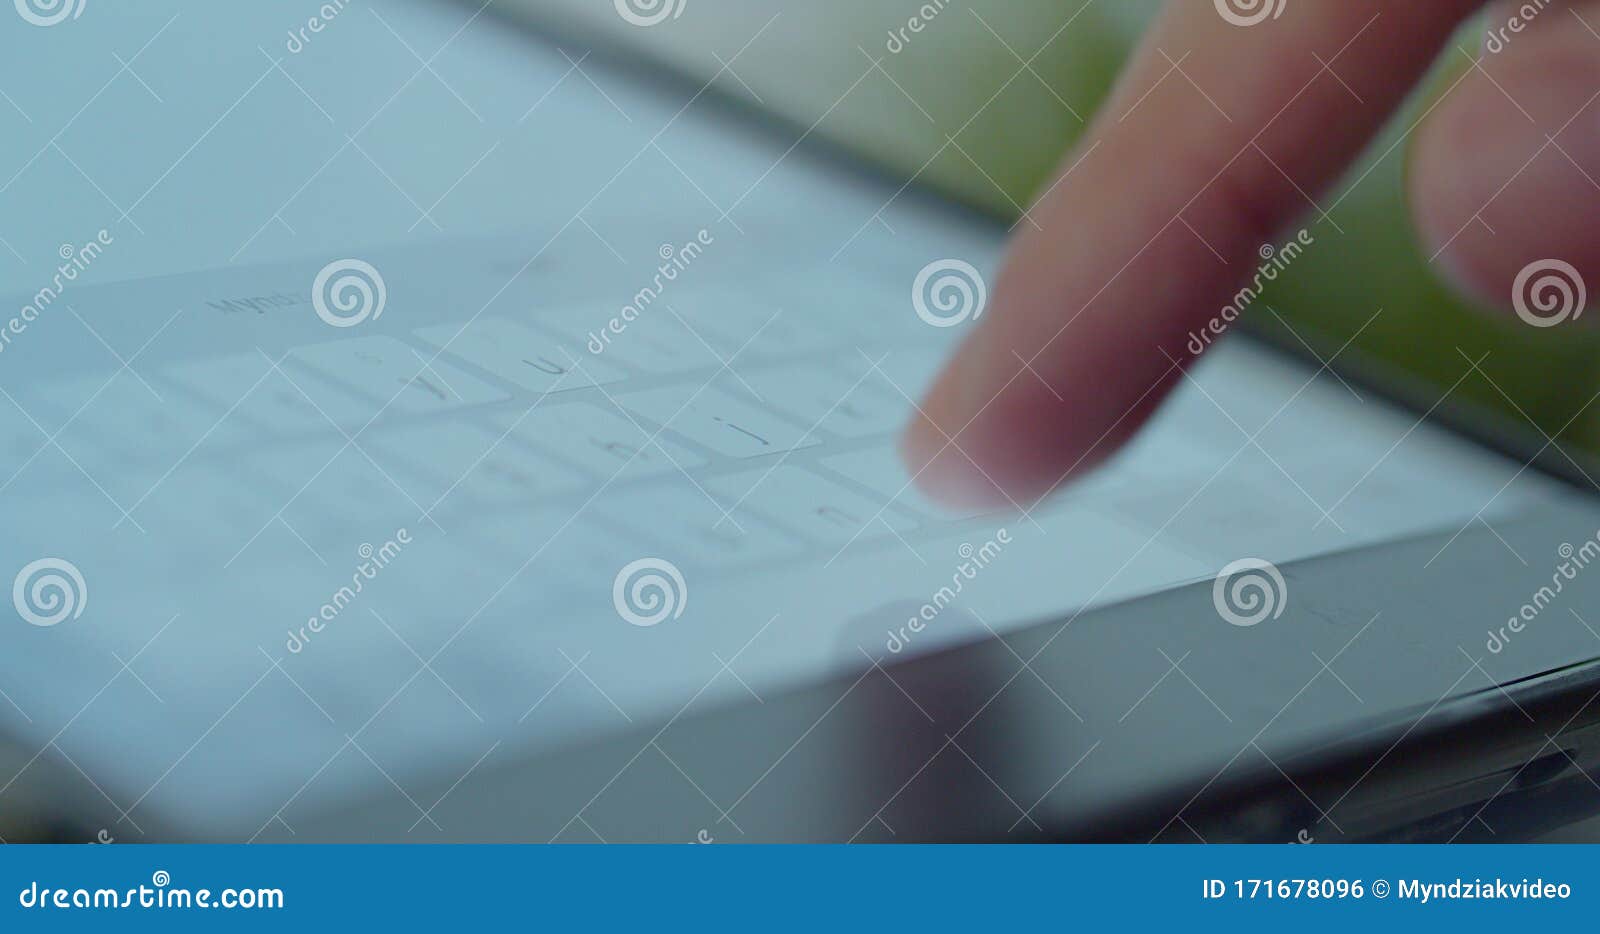 close-up shot of male hands in profile typing in messenger using tabletpc. hands typing text on tabletpc close-up.